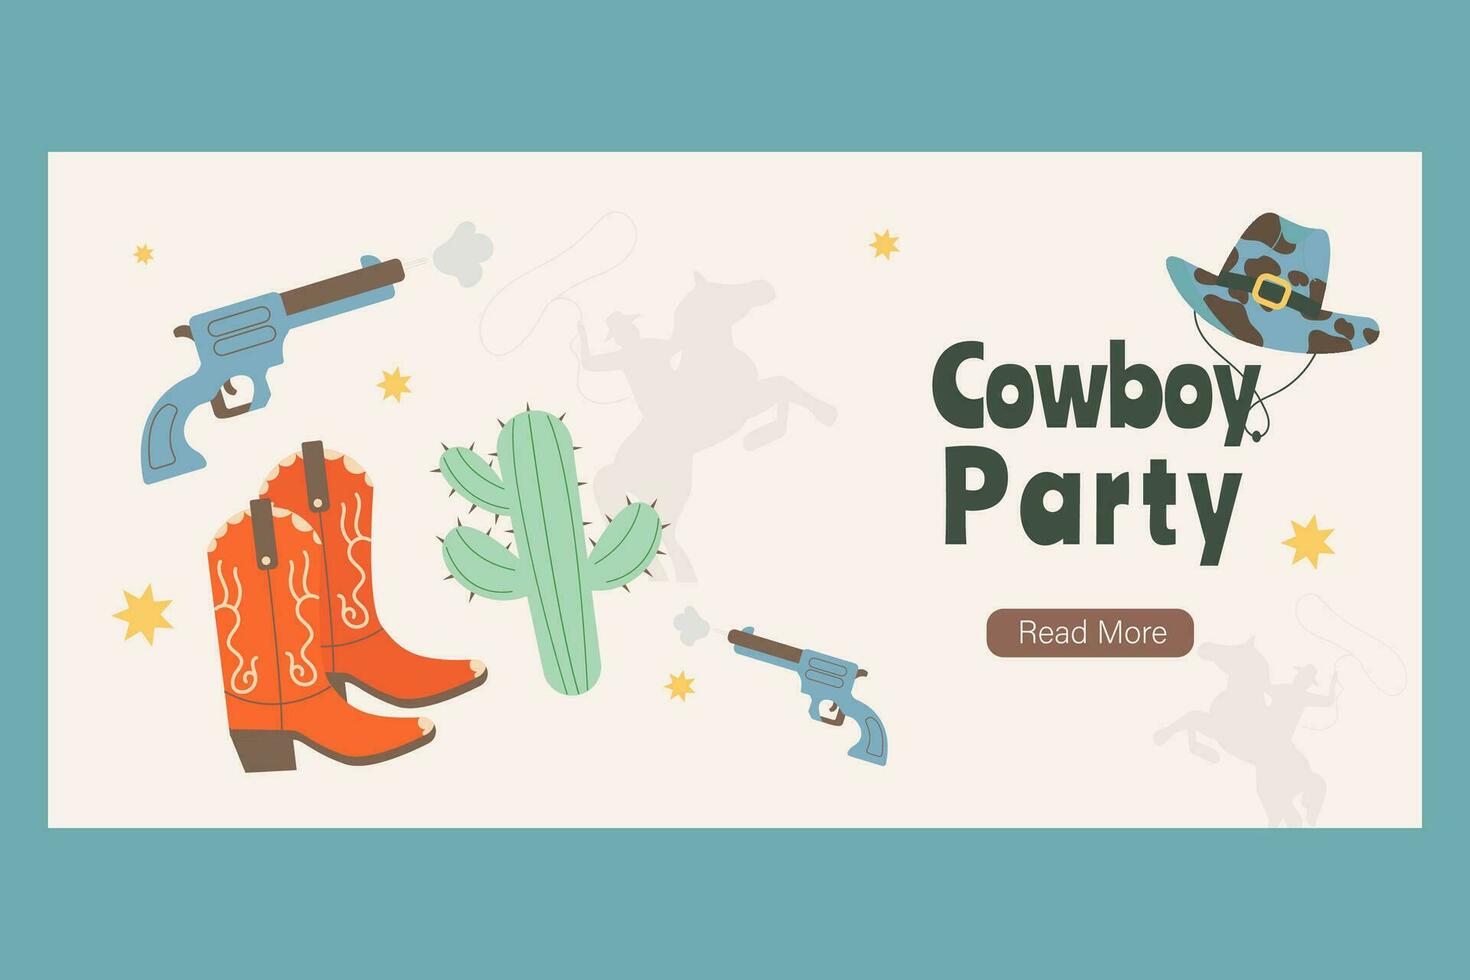 Cowboy party banner in flat style vector